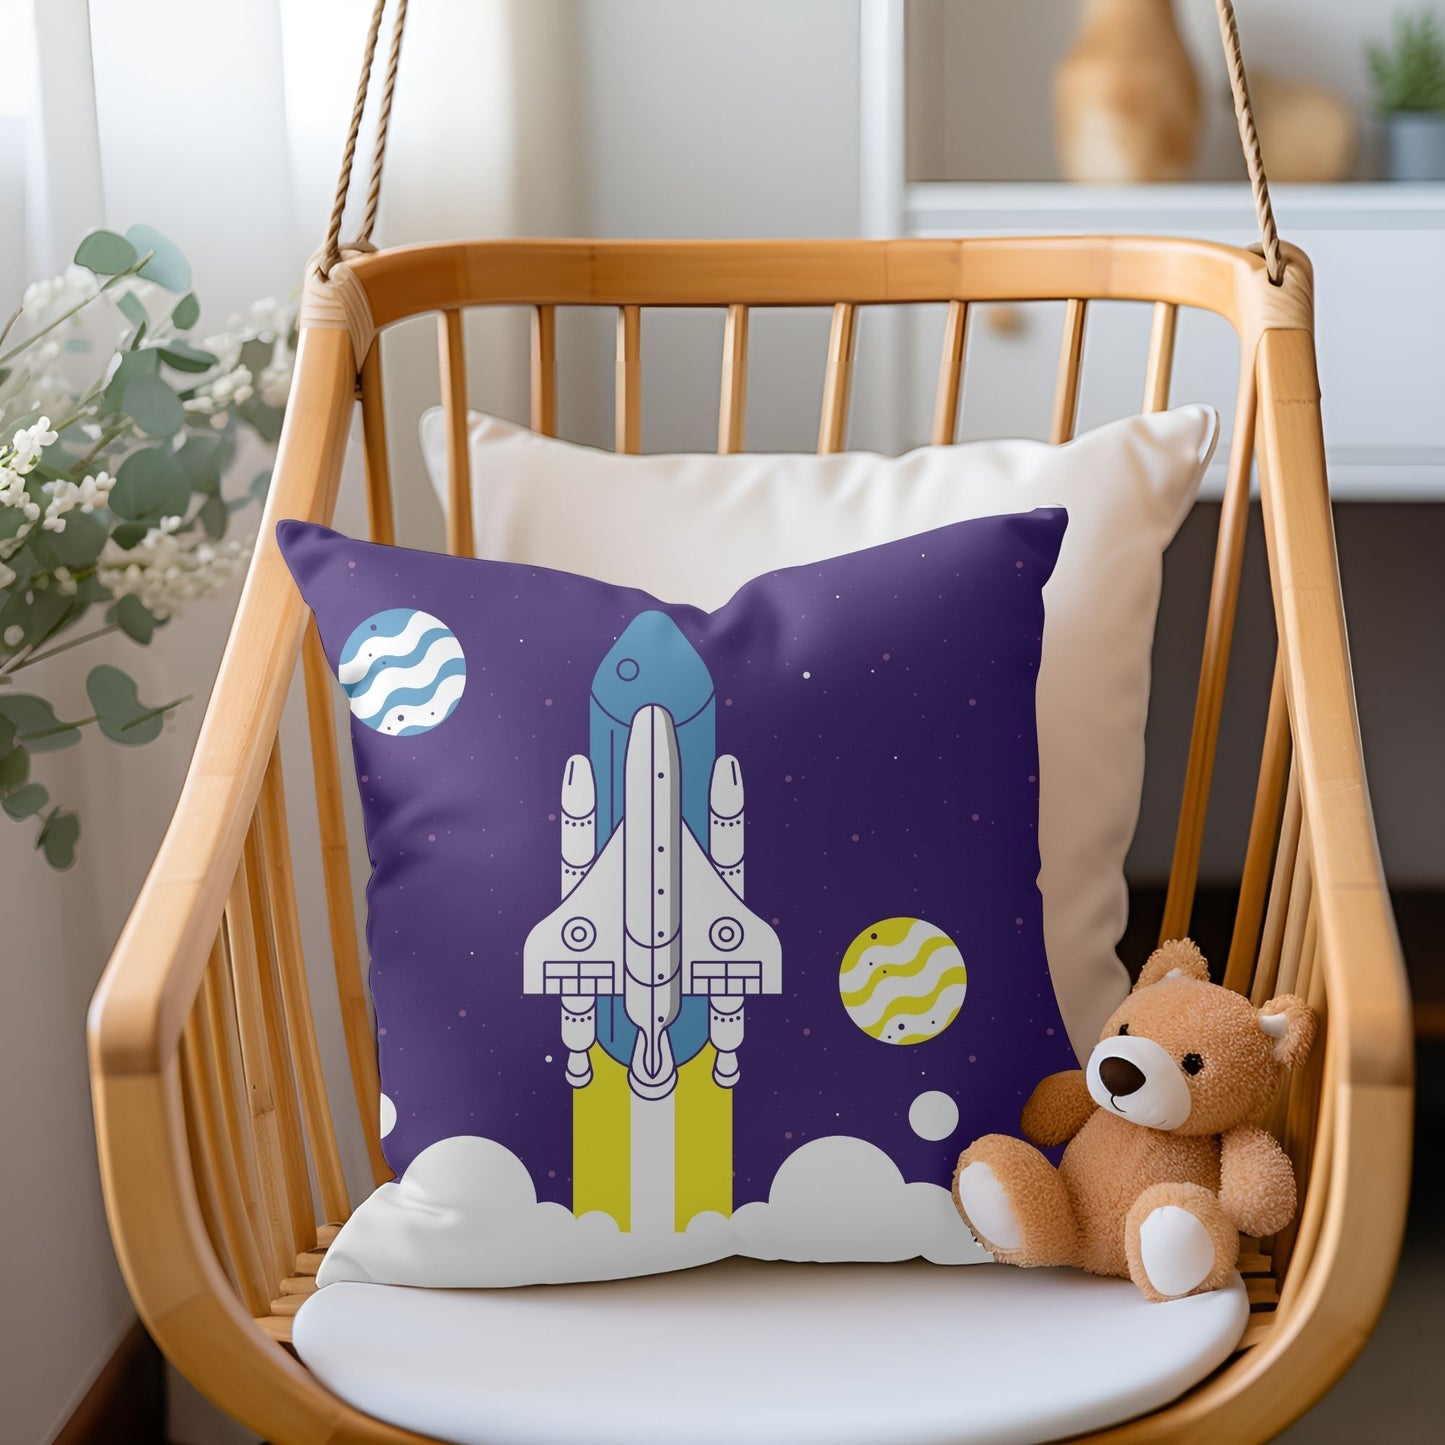 Adorable space rocket takeoff patterned pillow to ignite young imaginations.